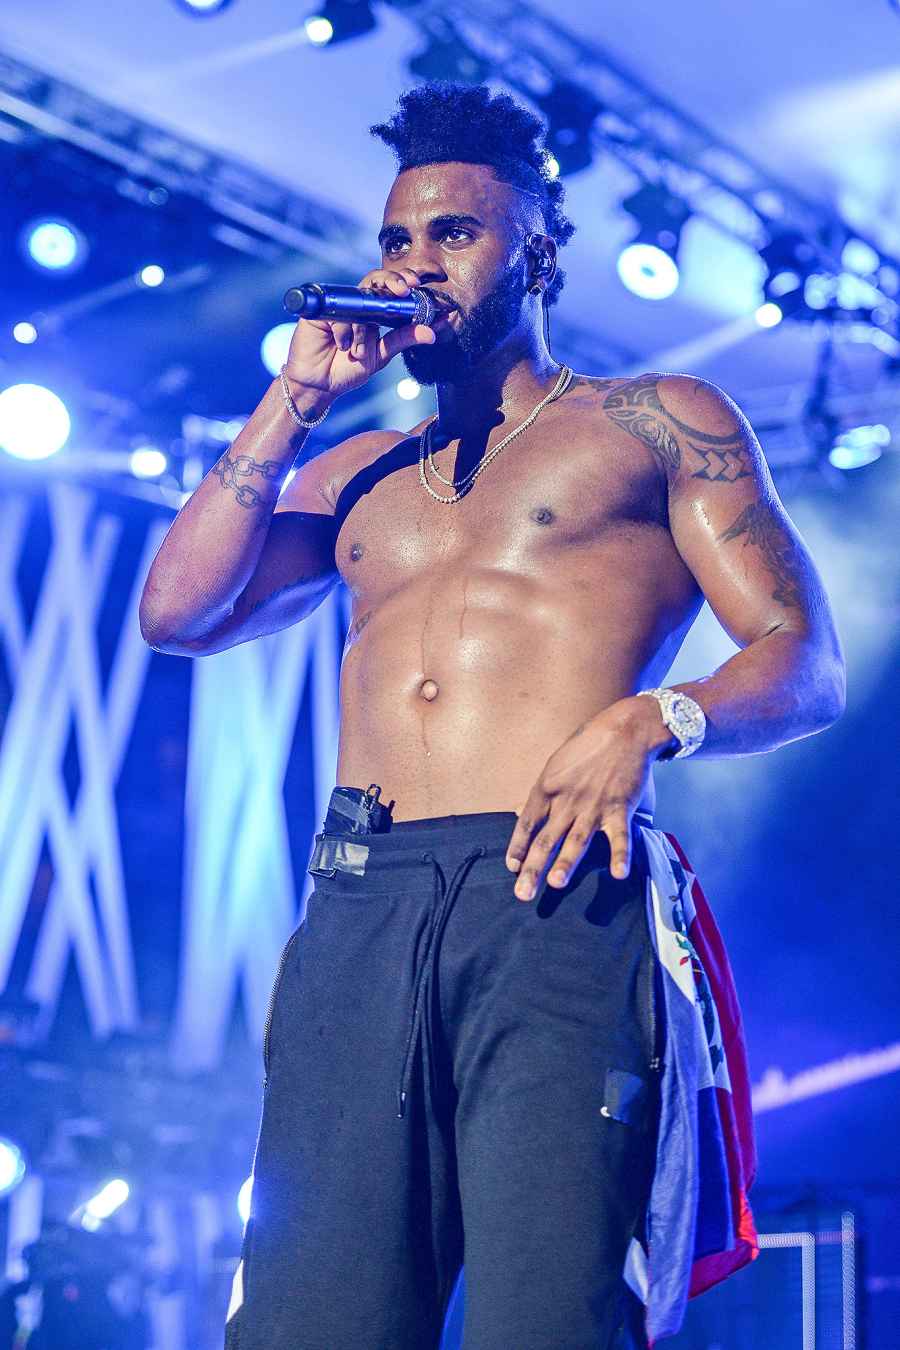 Shirtless Hunks Hot Celebs and Their Insane Physiques Jason Derulo